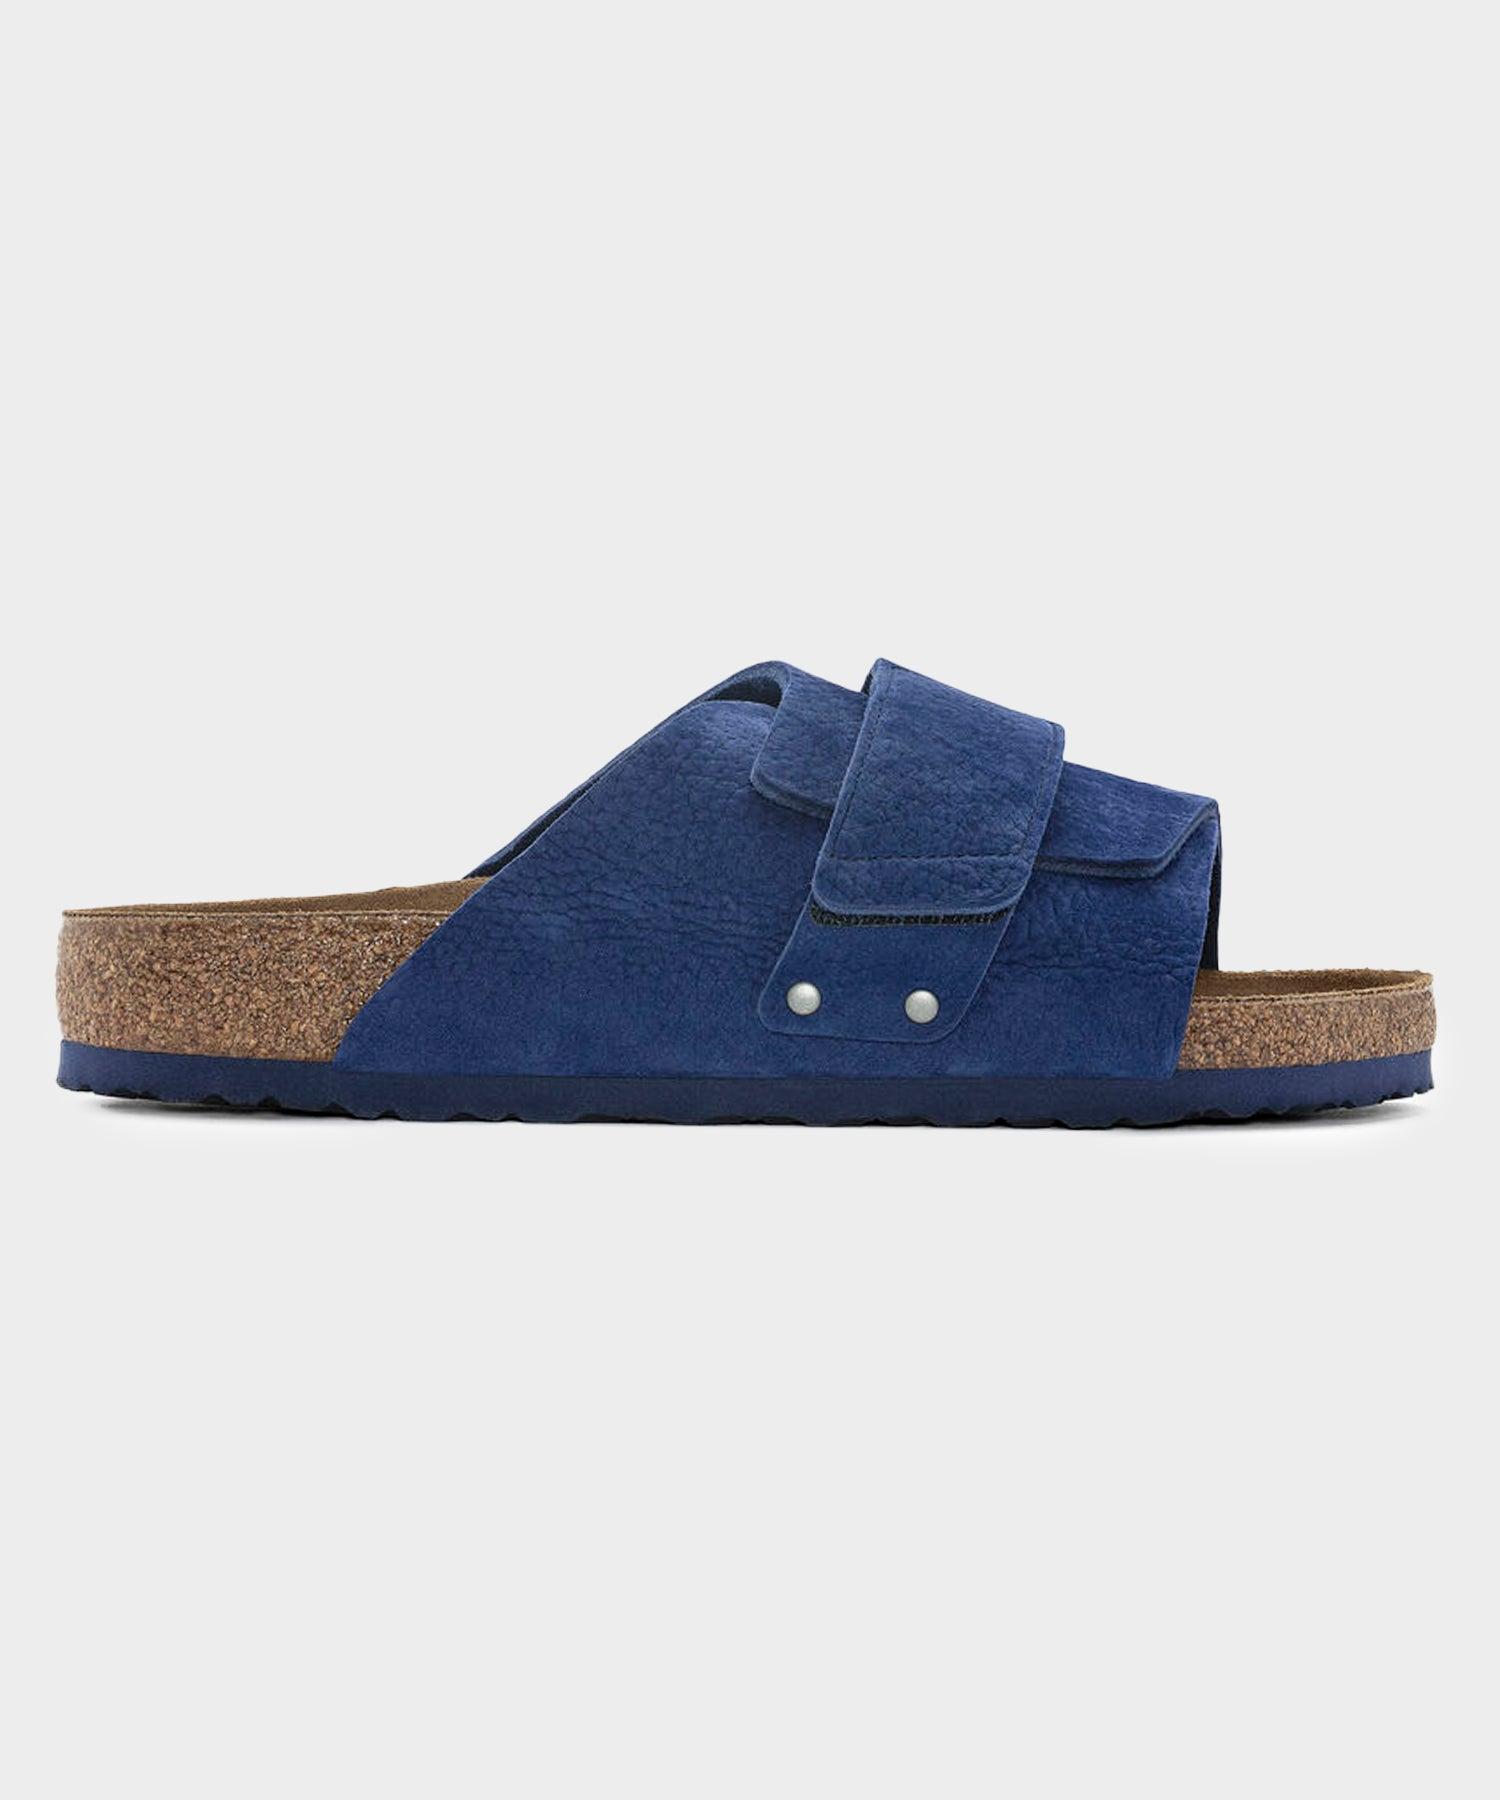 Mens Kyoto Suede Sandals Product Image